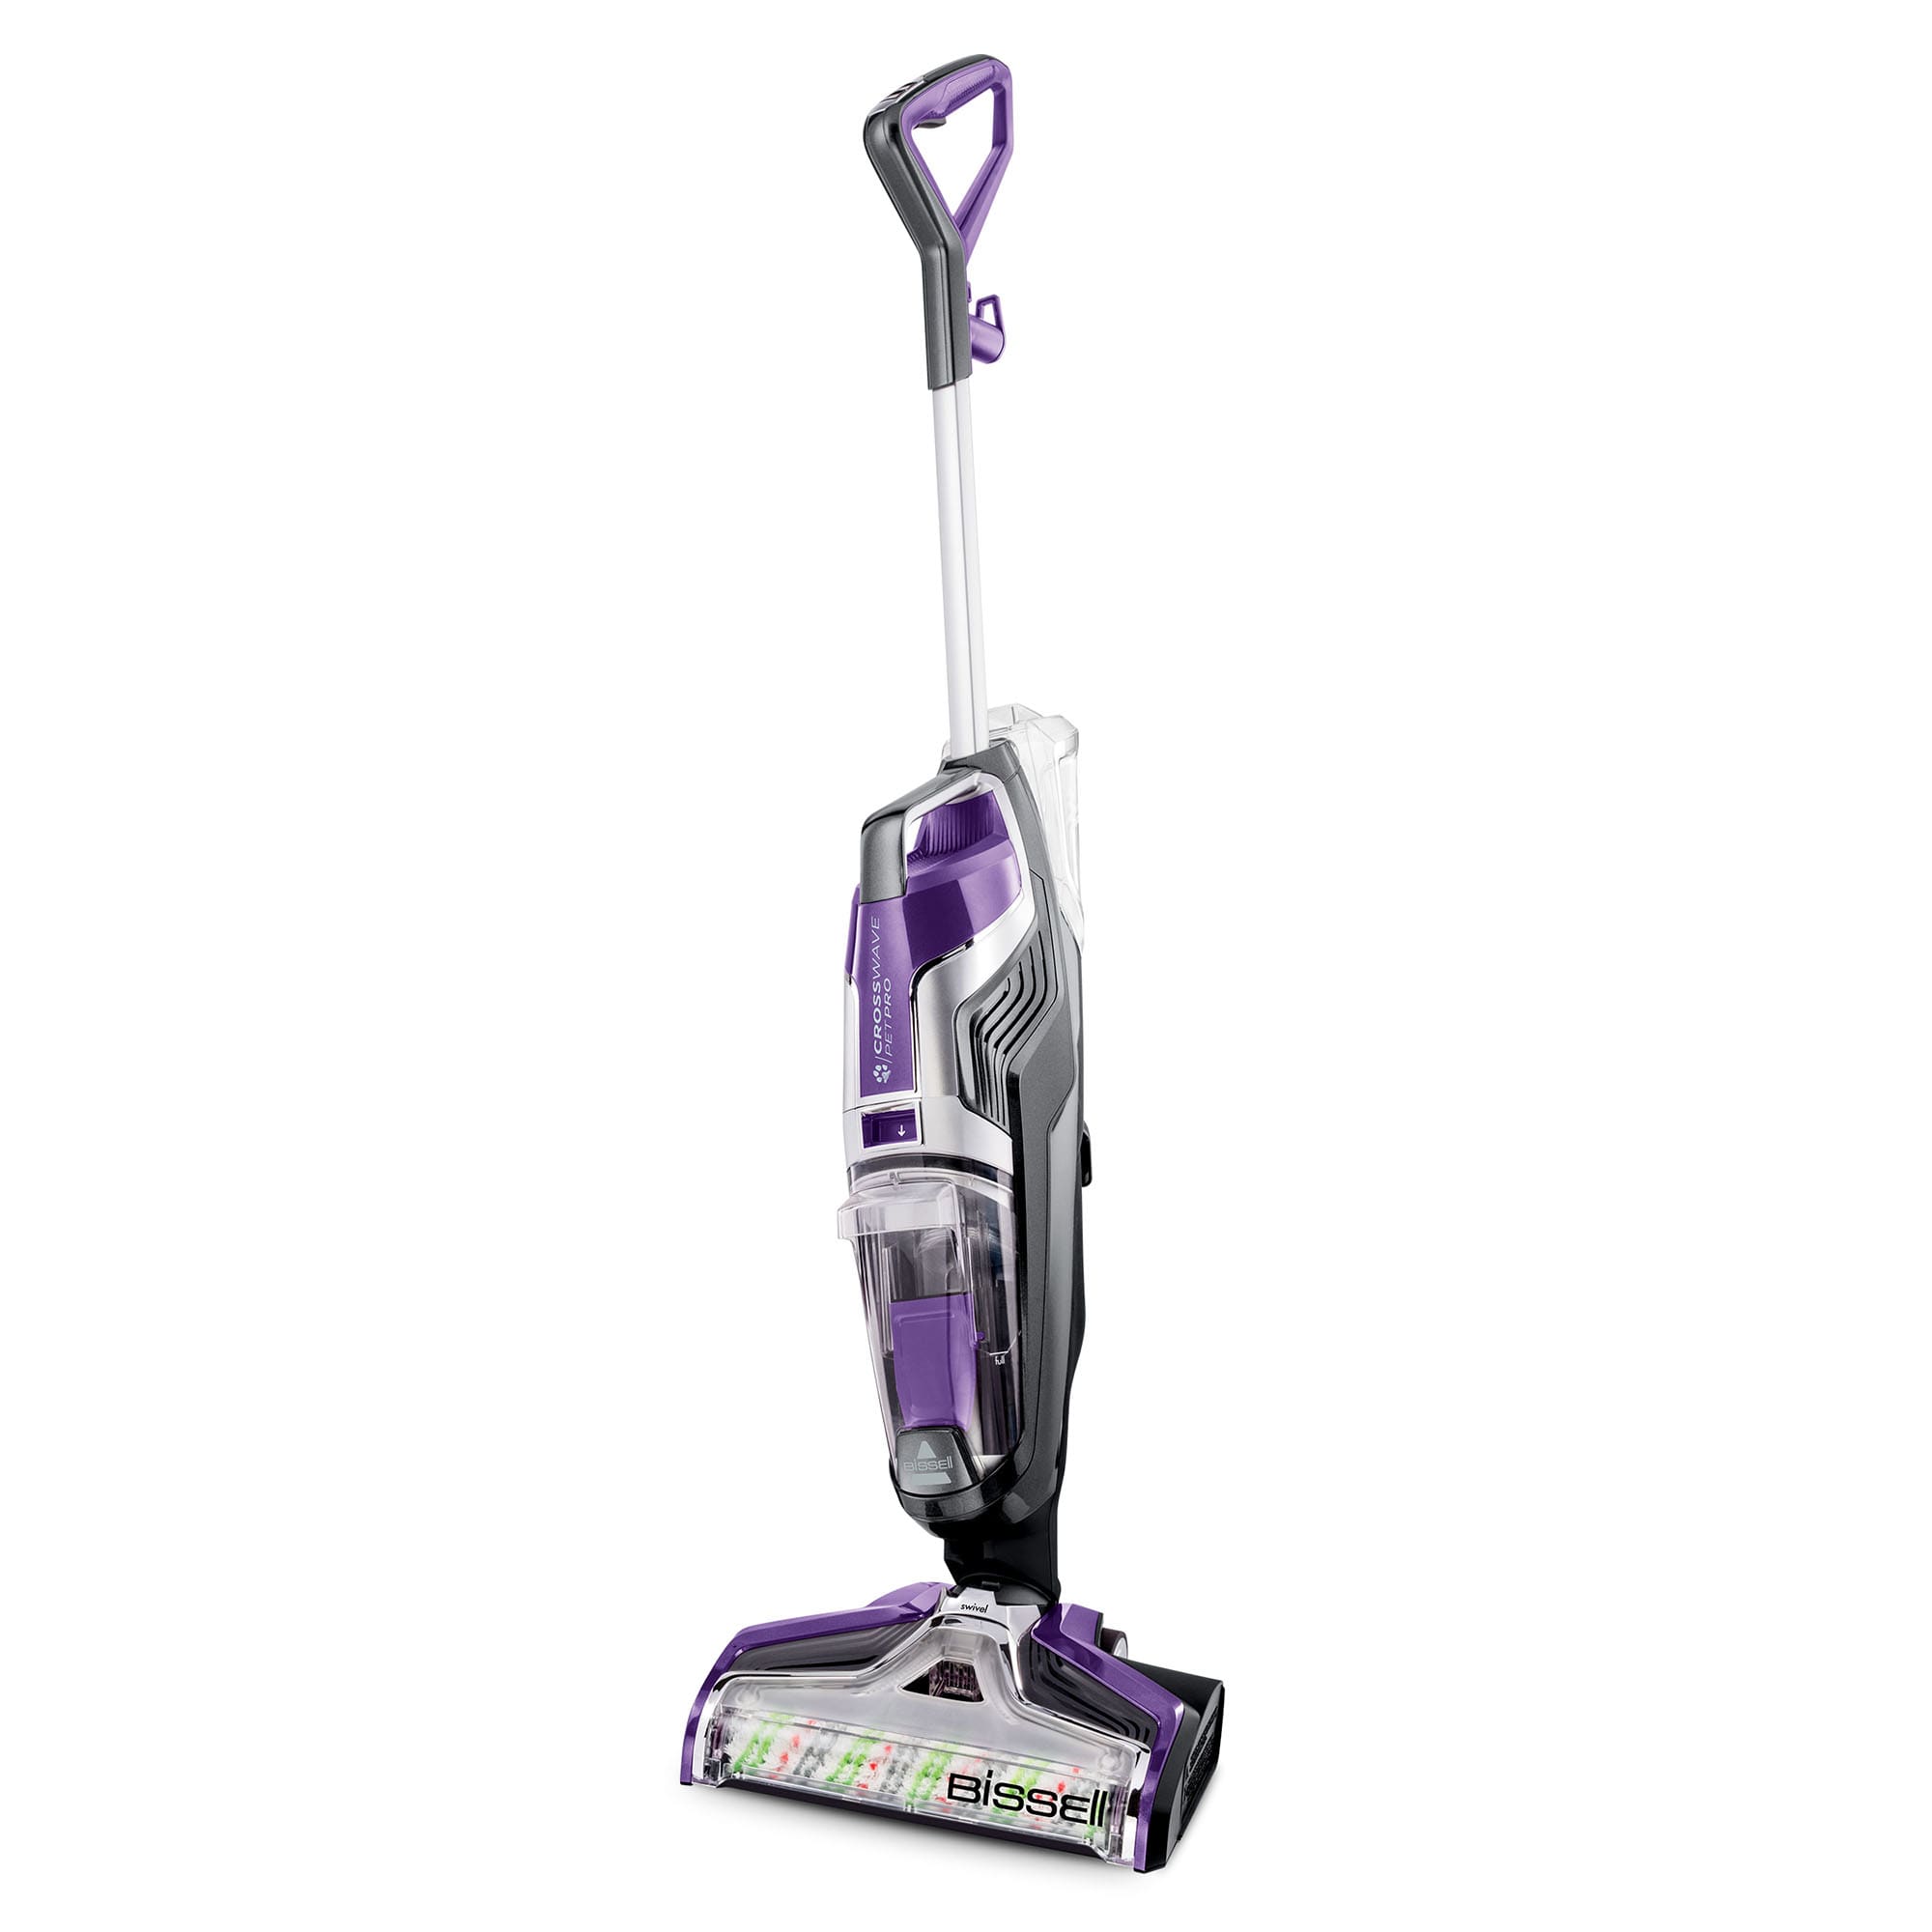 Bissell Crosswave Pro Multi-Surface Vaccum Cleaner